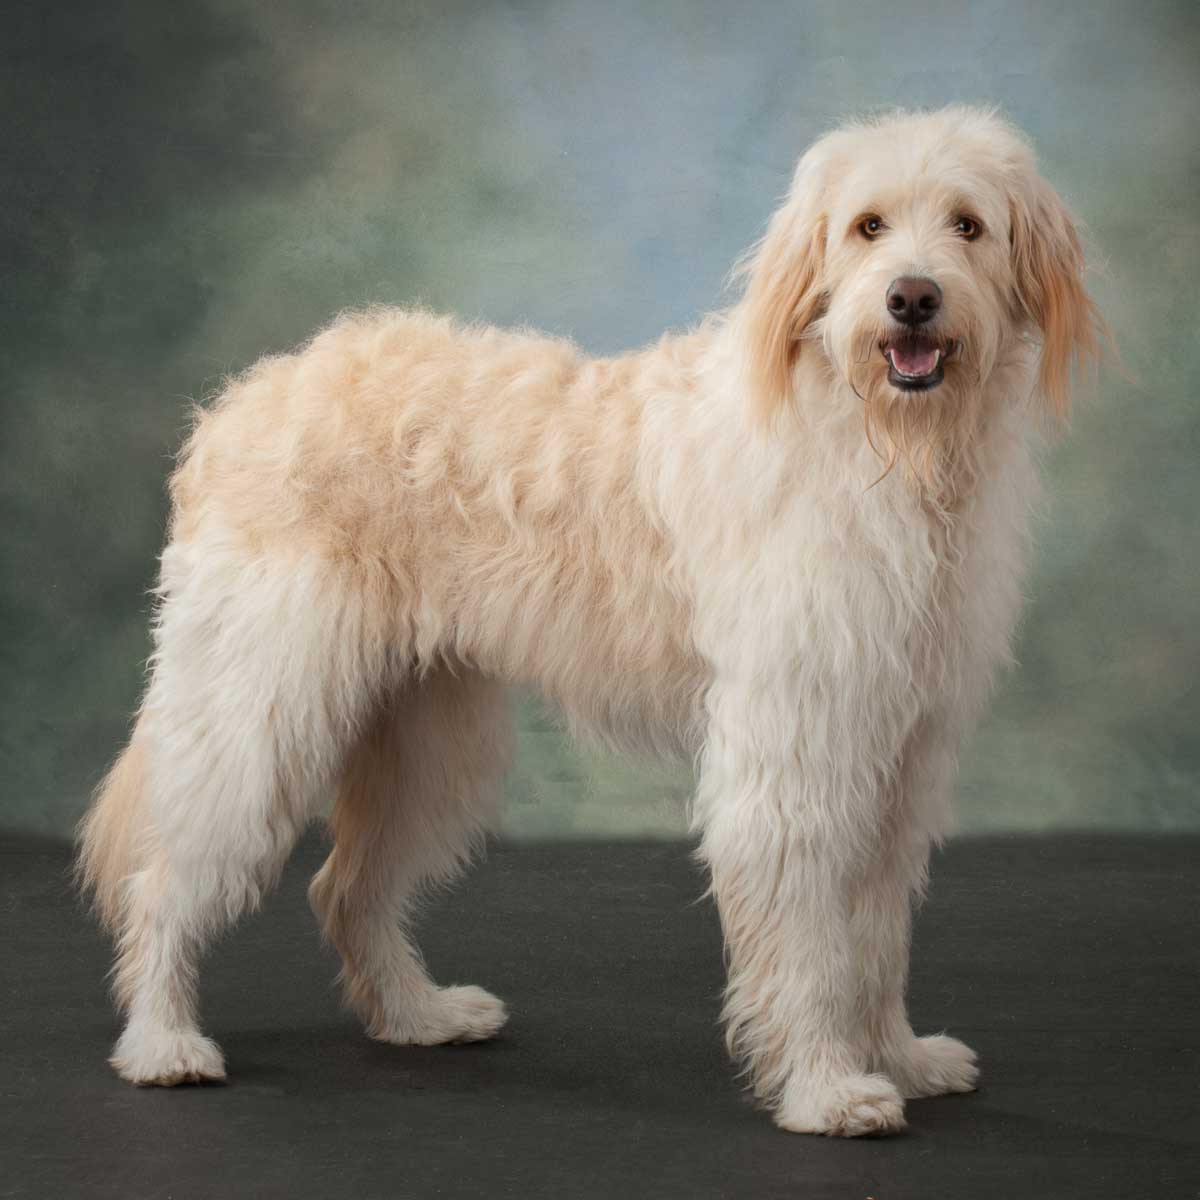 A white and brown dog standing on top of a black floor.